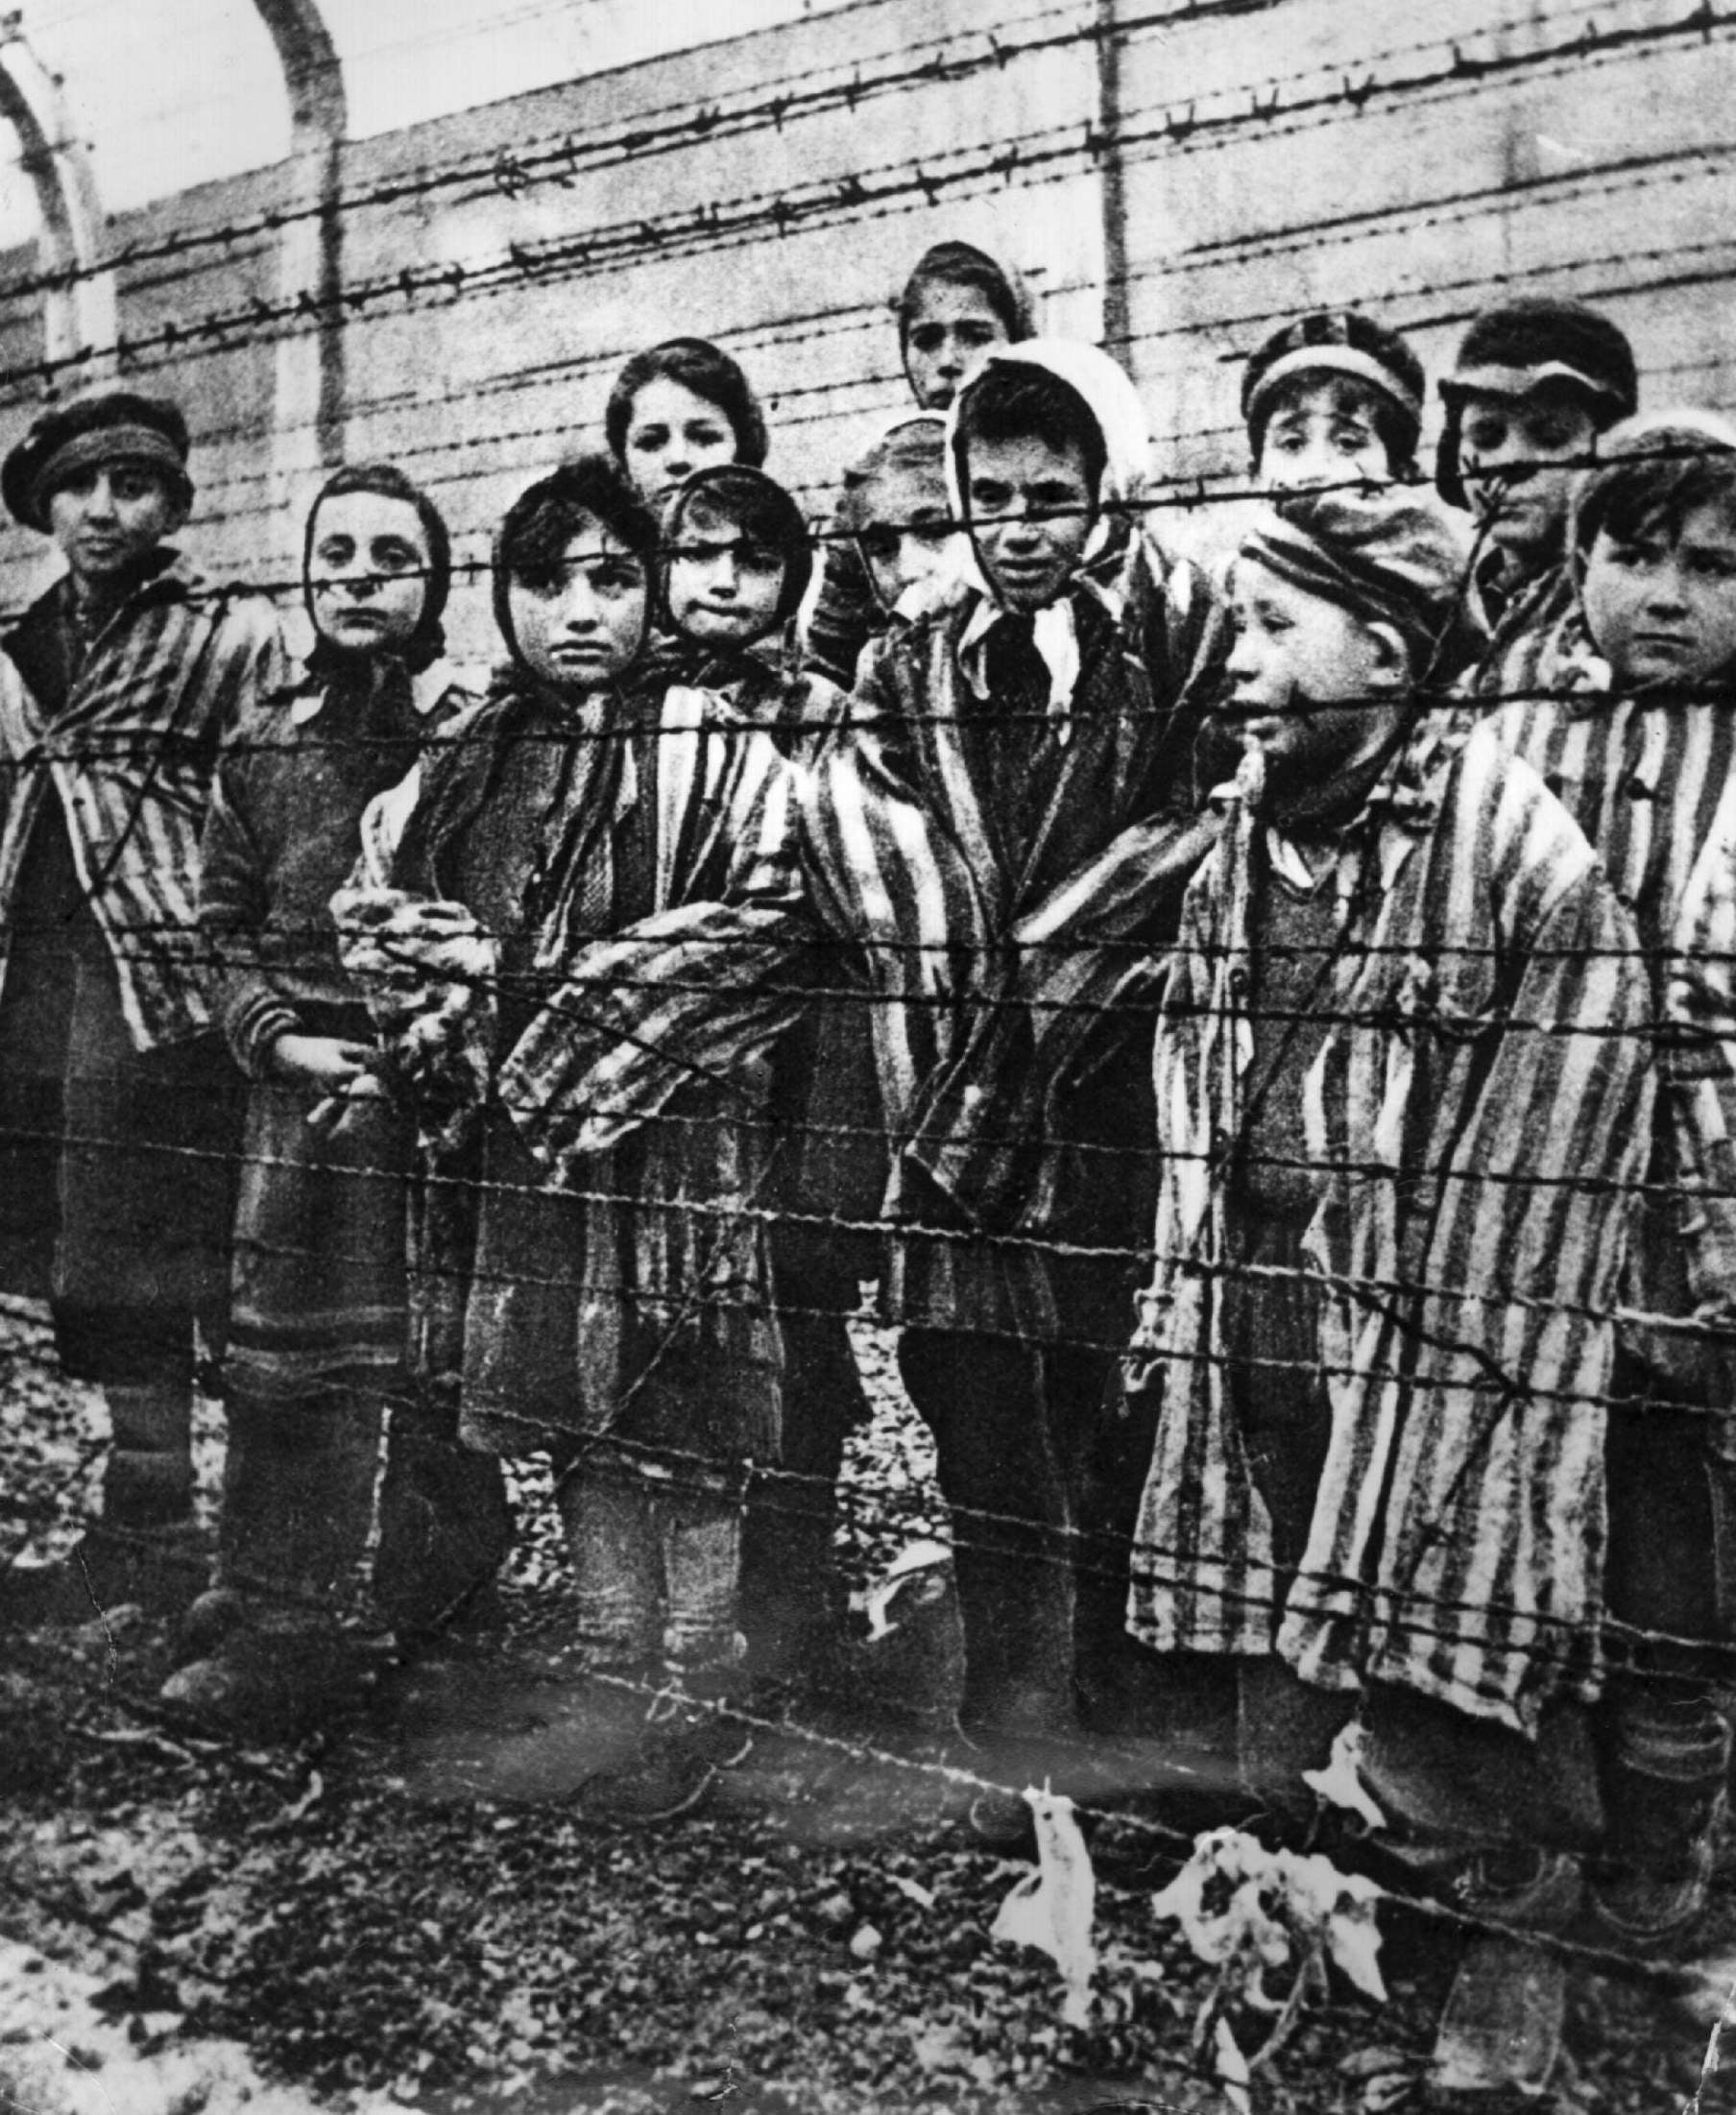 Child survivors at Auschwitz-Birkenau on 27 January 1945, when the camp was liberated by the Red Army